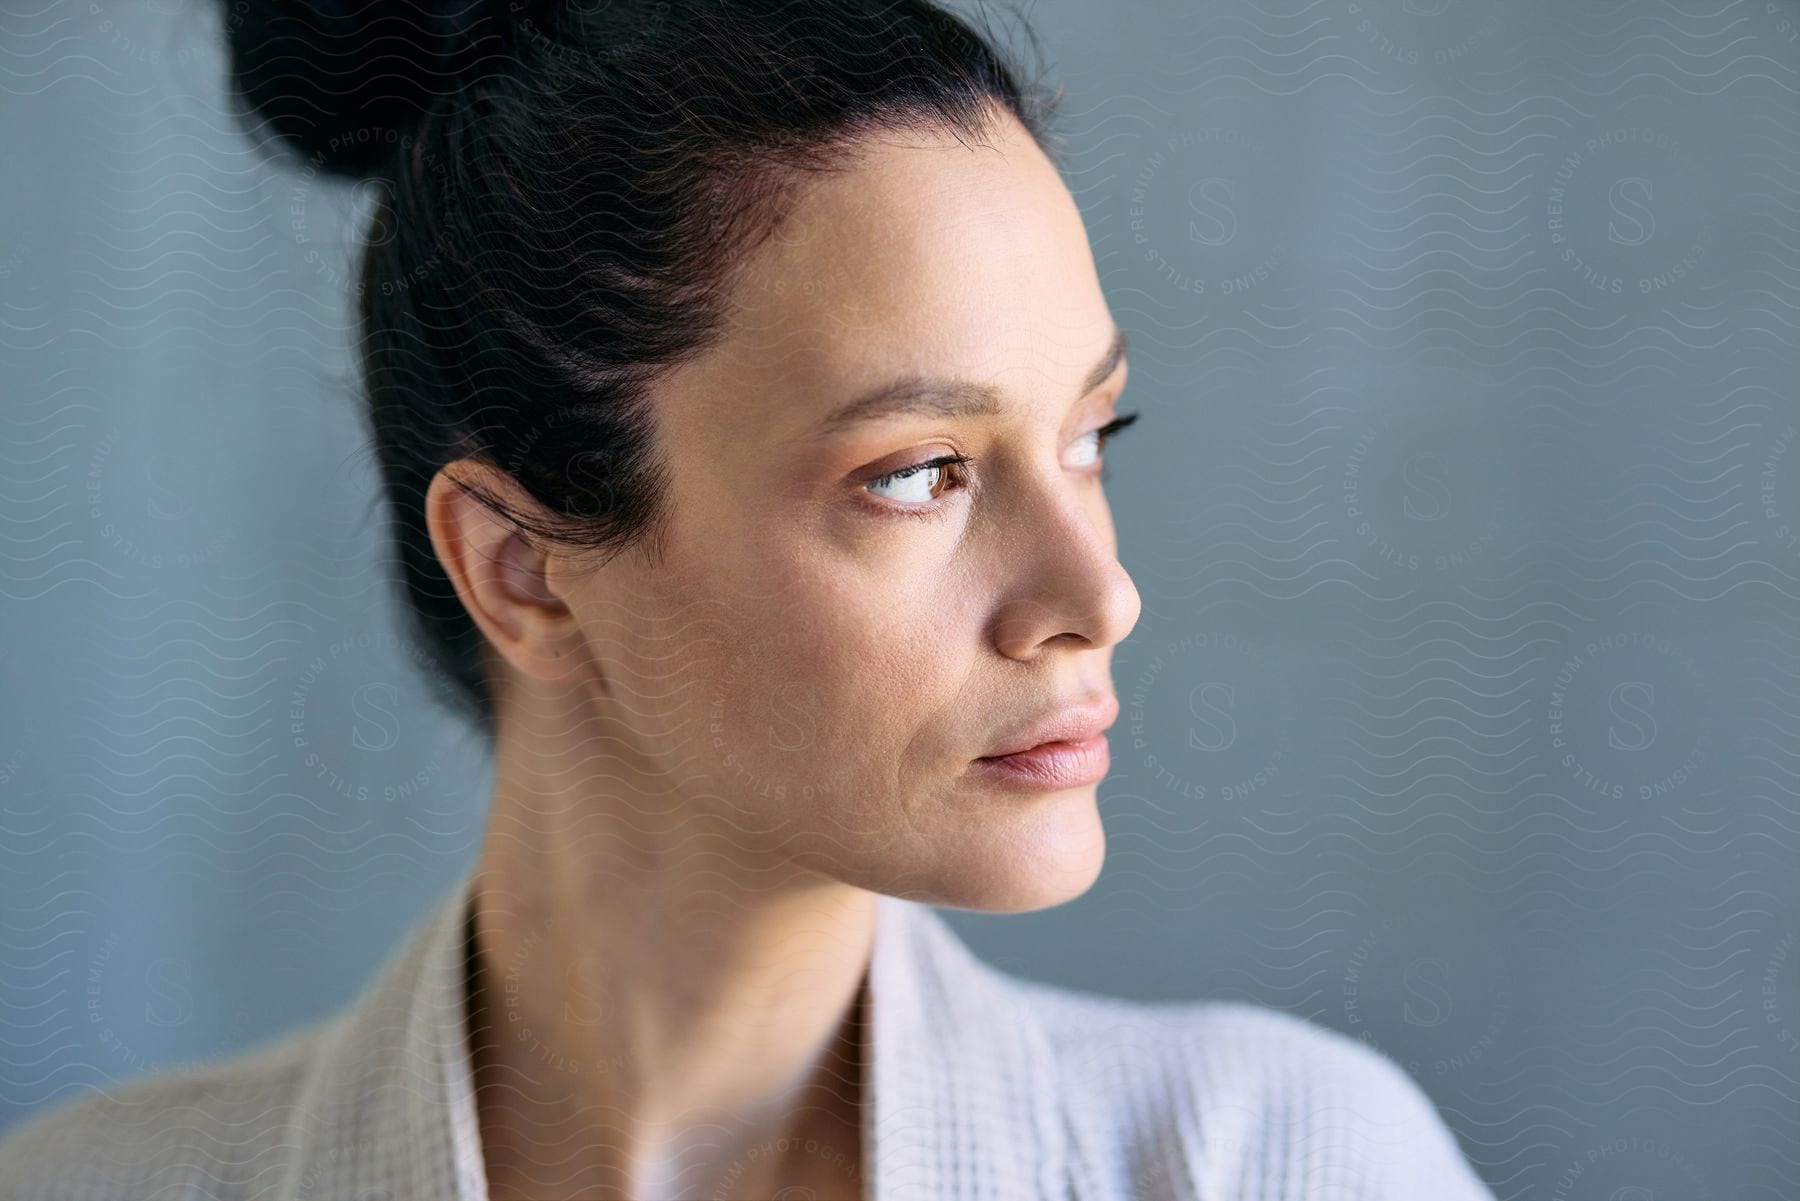 A profile view of a woman with a bun hairstyle, looking thoughtfully to the side.